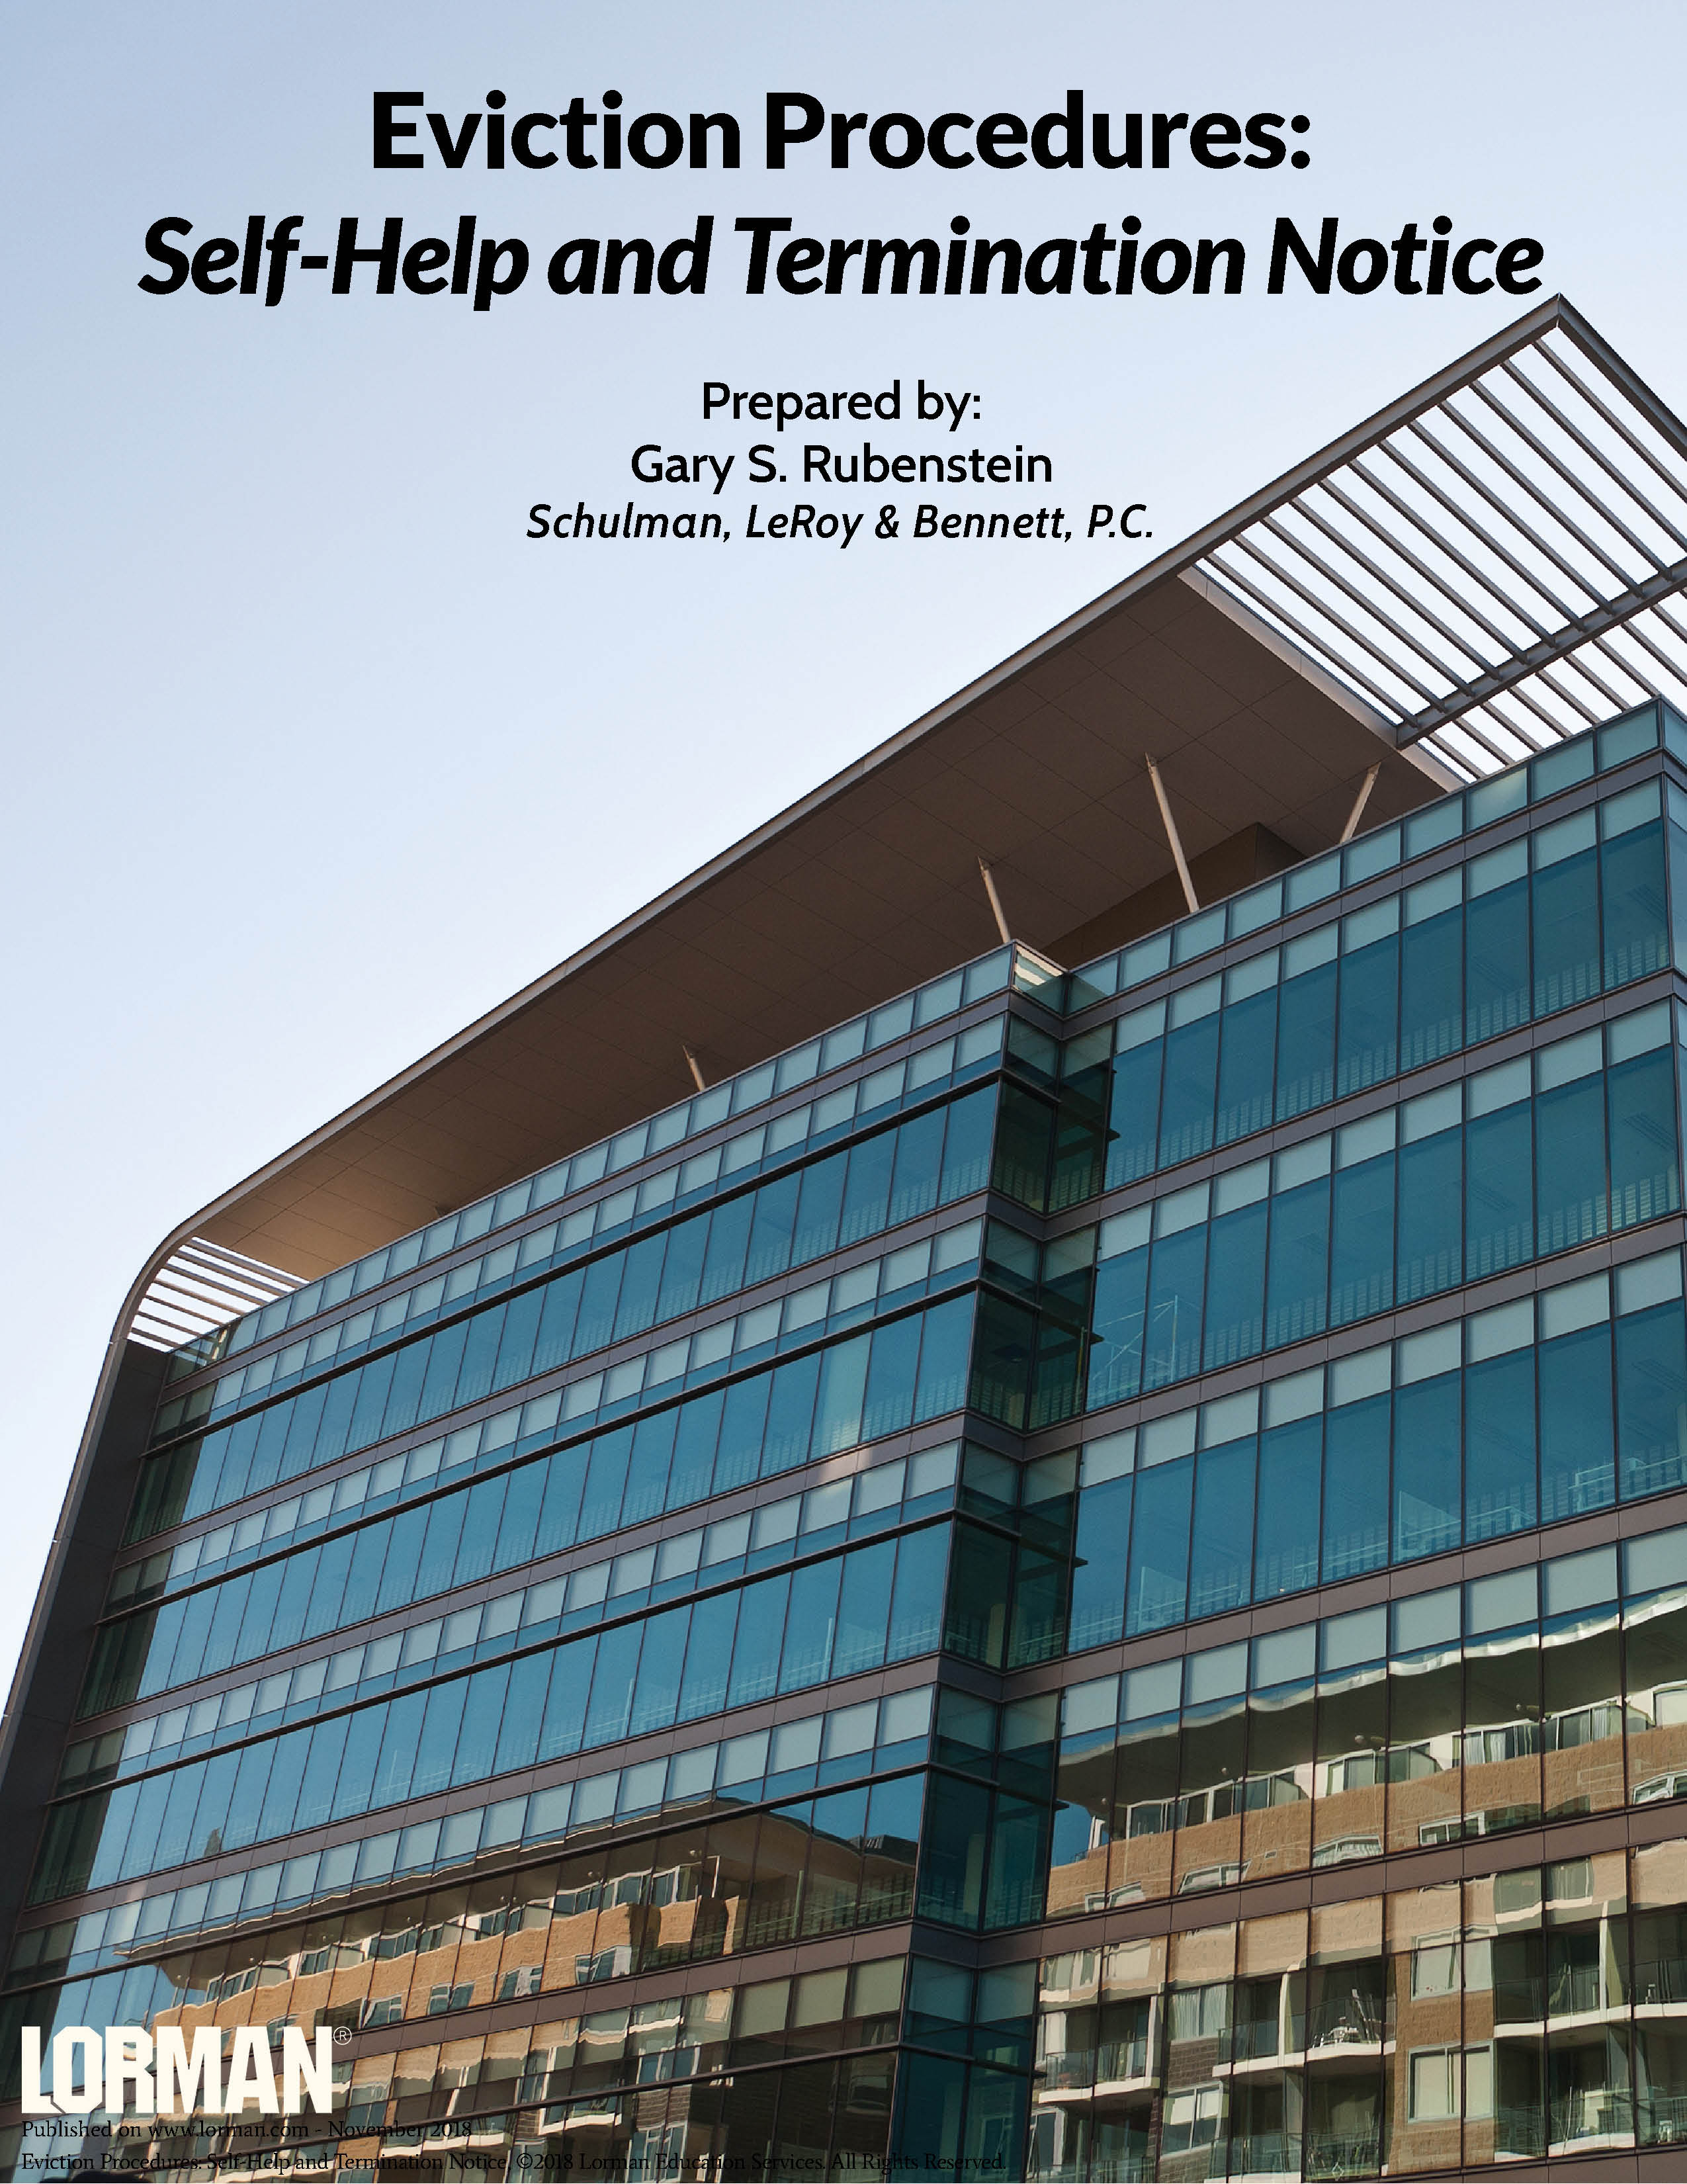 Eviction Practices and Procedures: Self-Help and Termination Notice